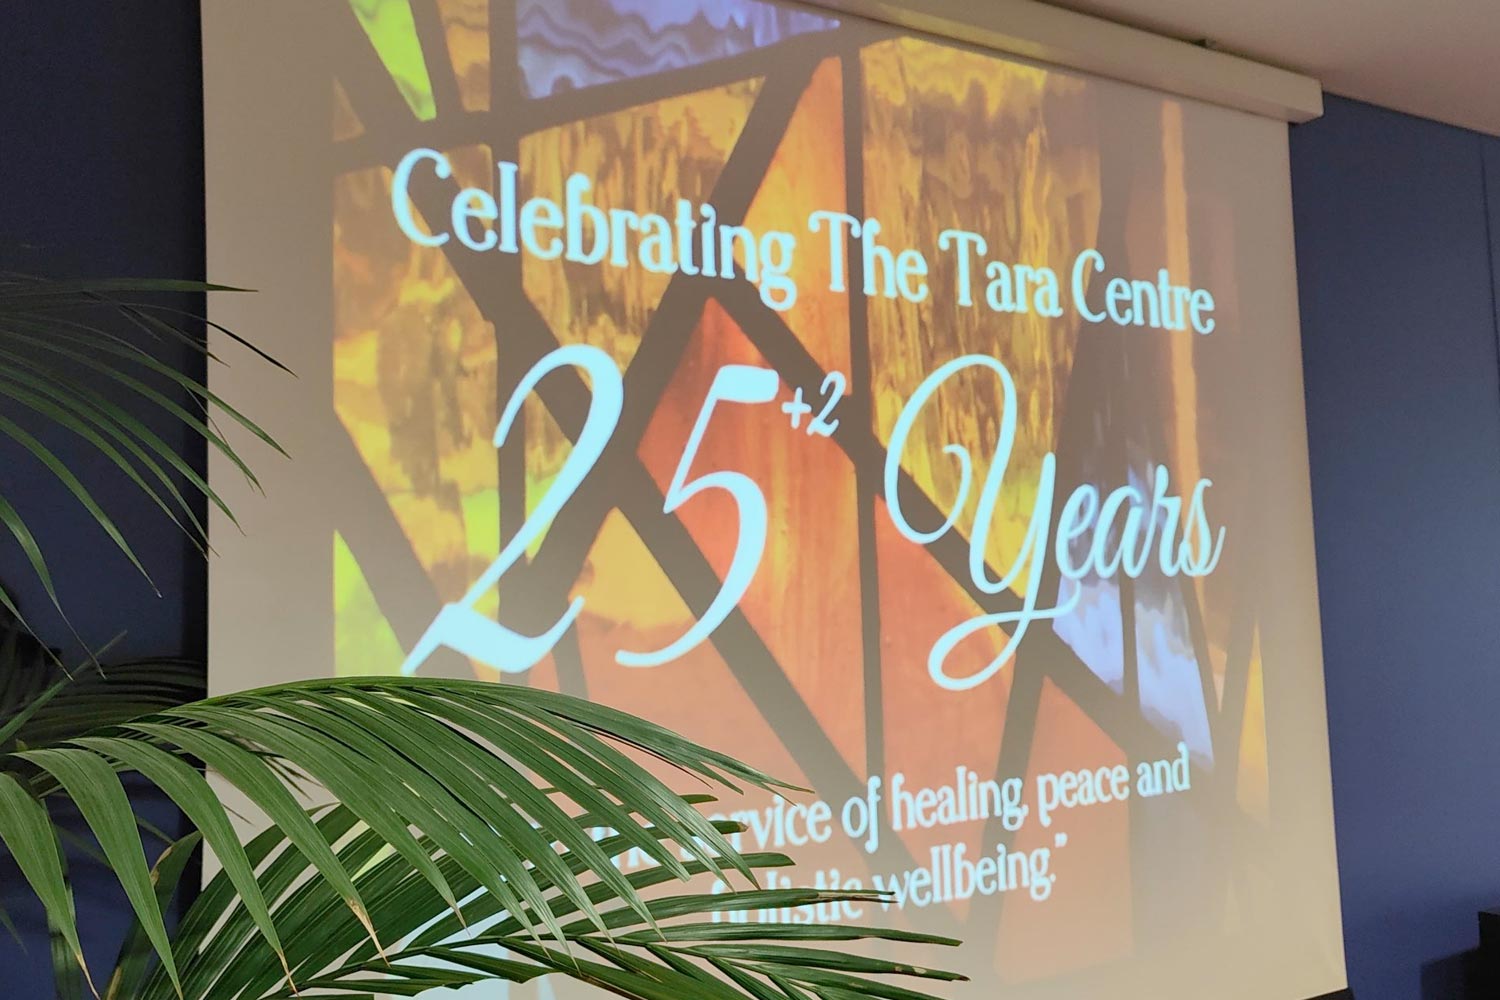 Tara Centre Celebrates 27 Years <i>“.. in the service of healing, peace and holistic wellbeing”</i>